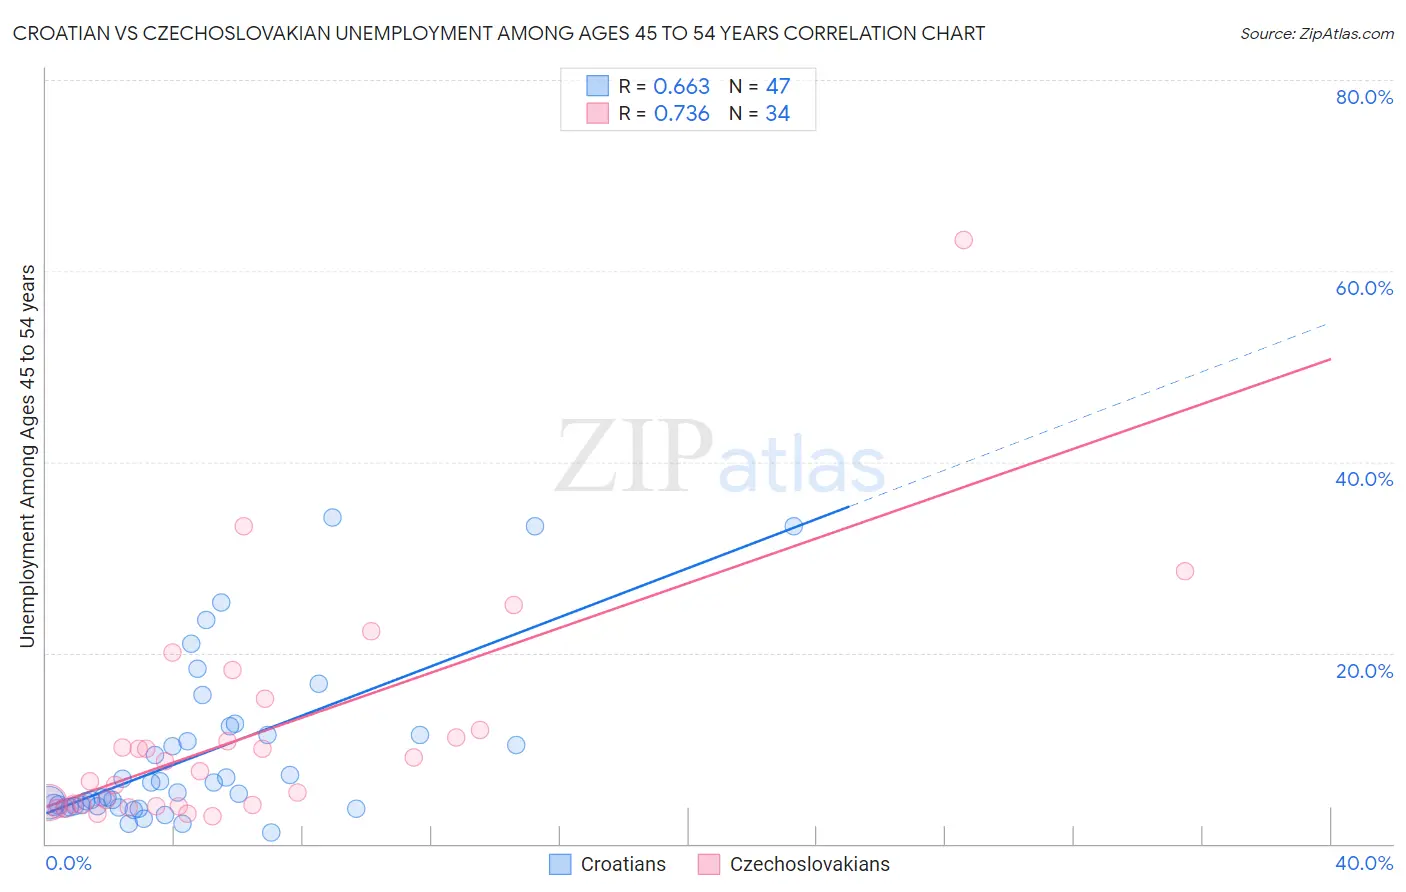 Croatian vs Czechoslovakian Unemployment Among Ages 45 to 54 years